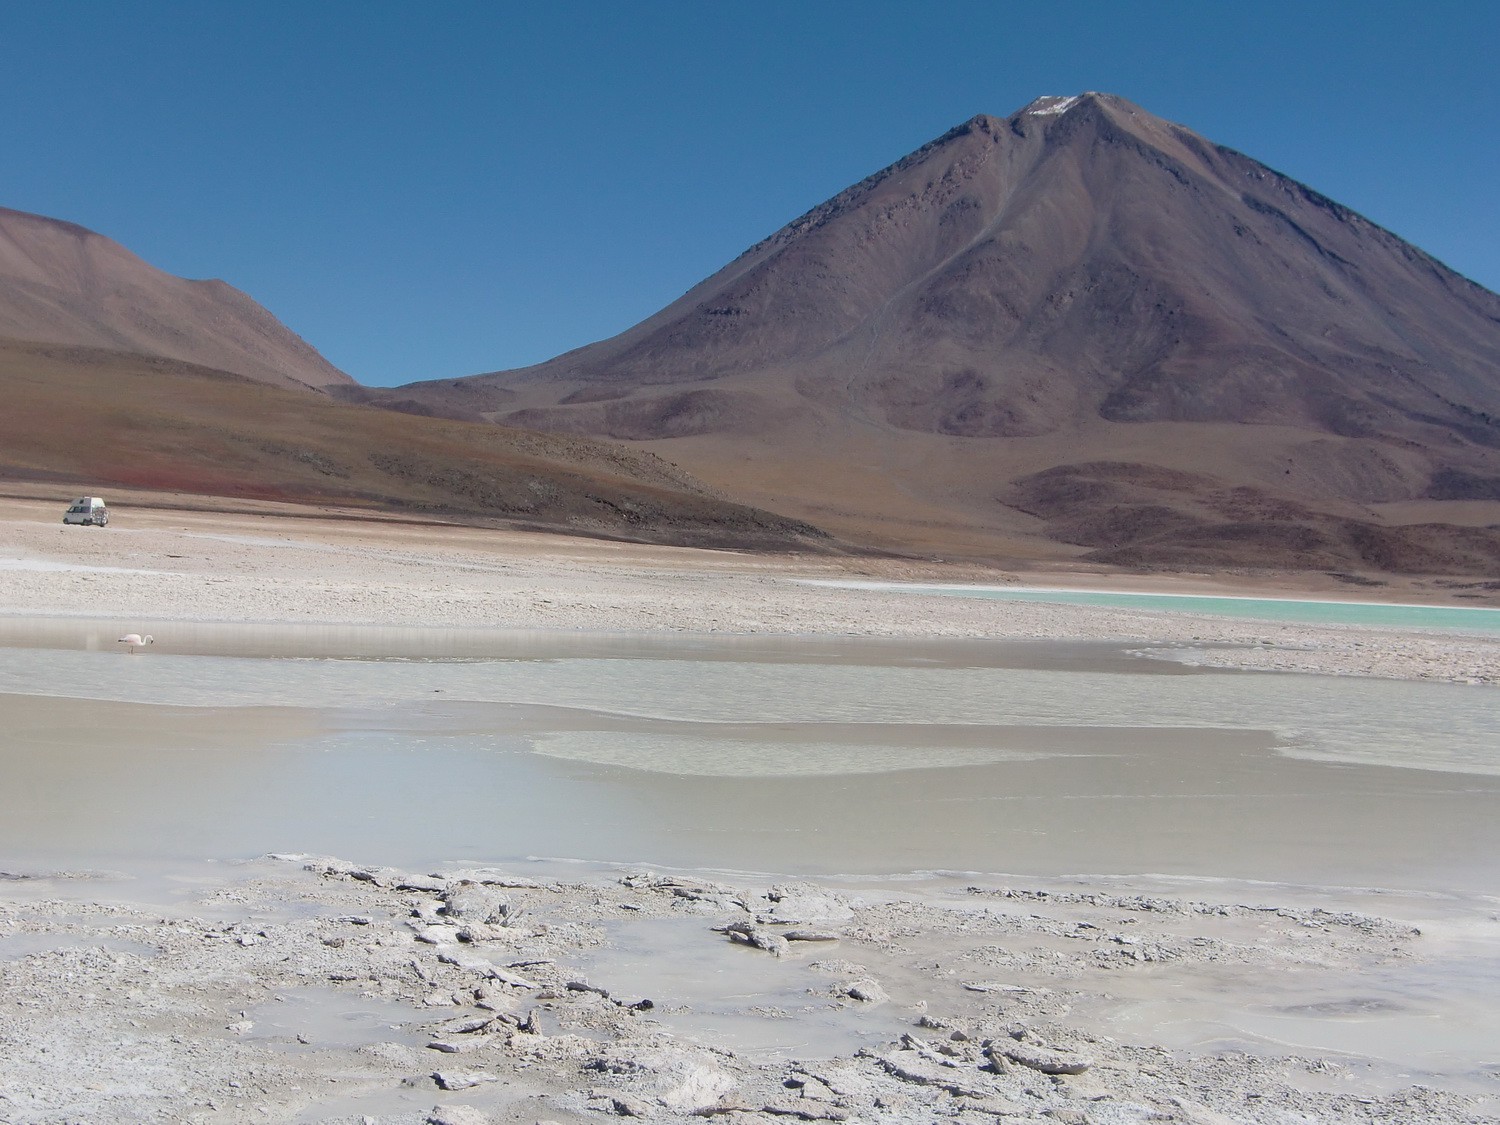 The Bolivian side of Licancabur with Lagunas Blanca and Verde